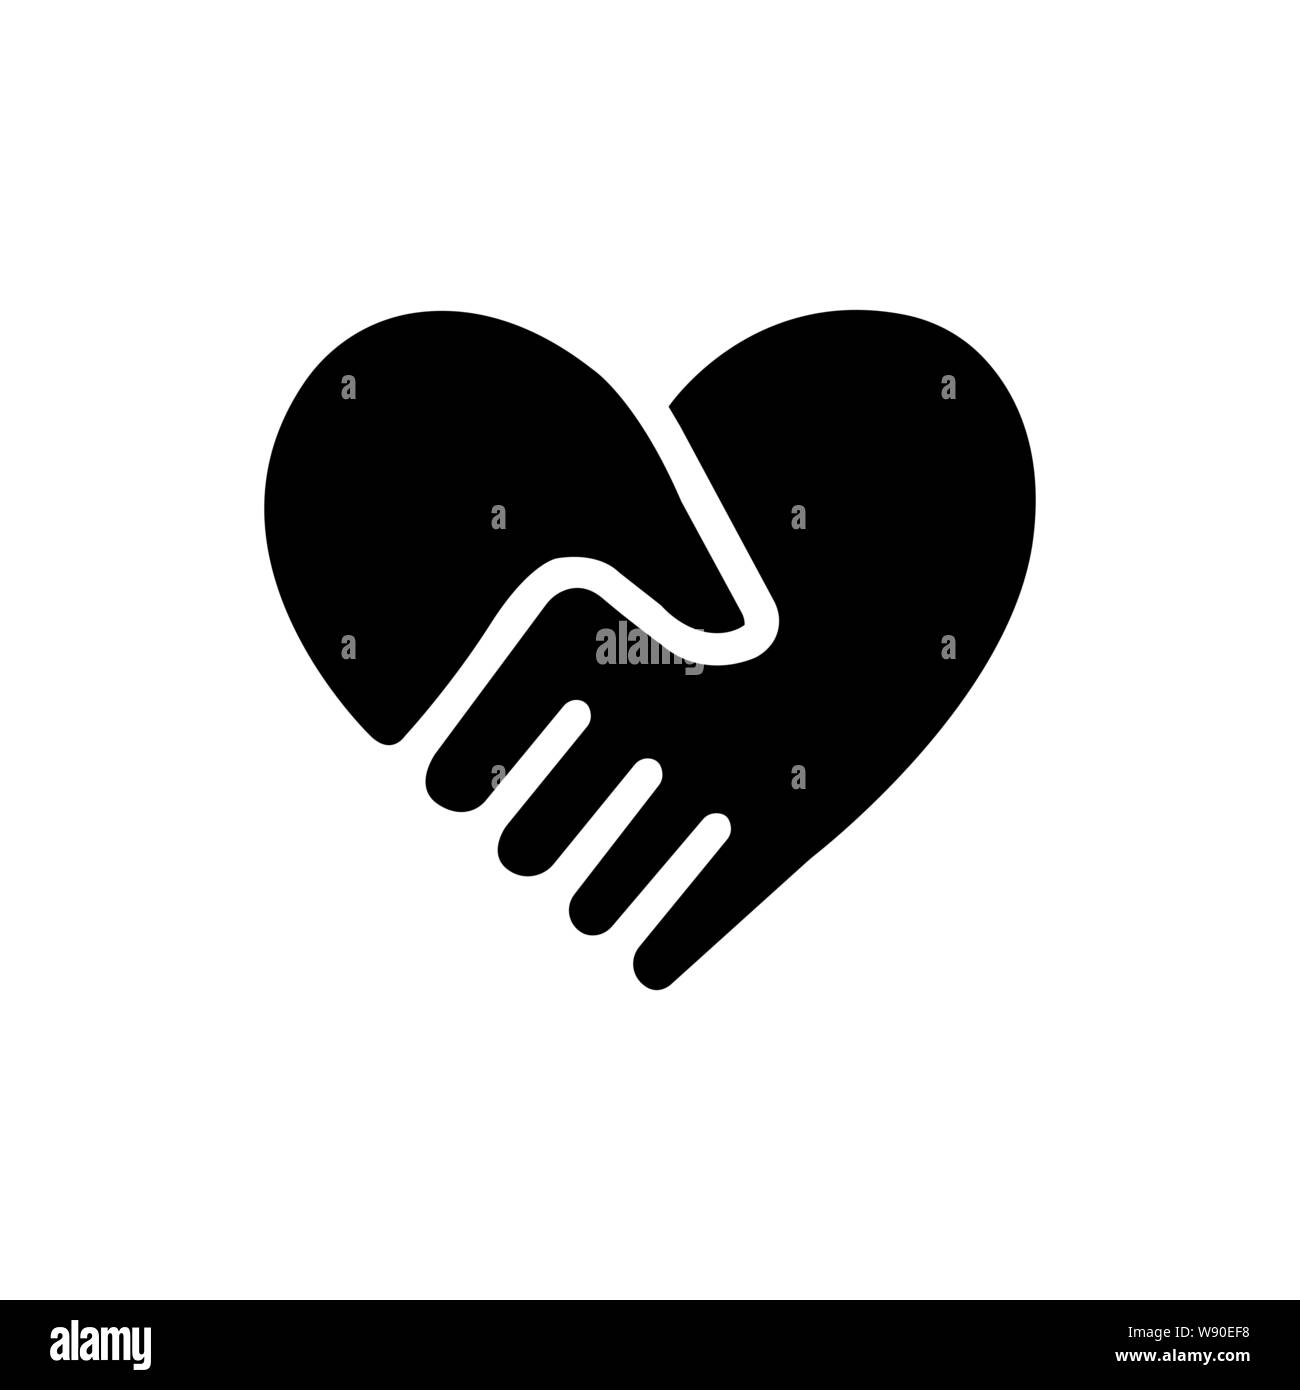 Handshake Forms The Heart Icon Vector Image and Illustration Stock Vector